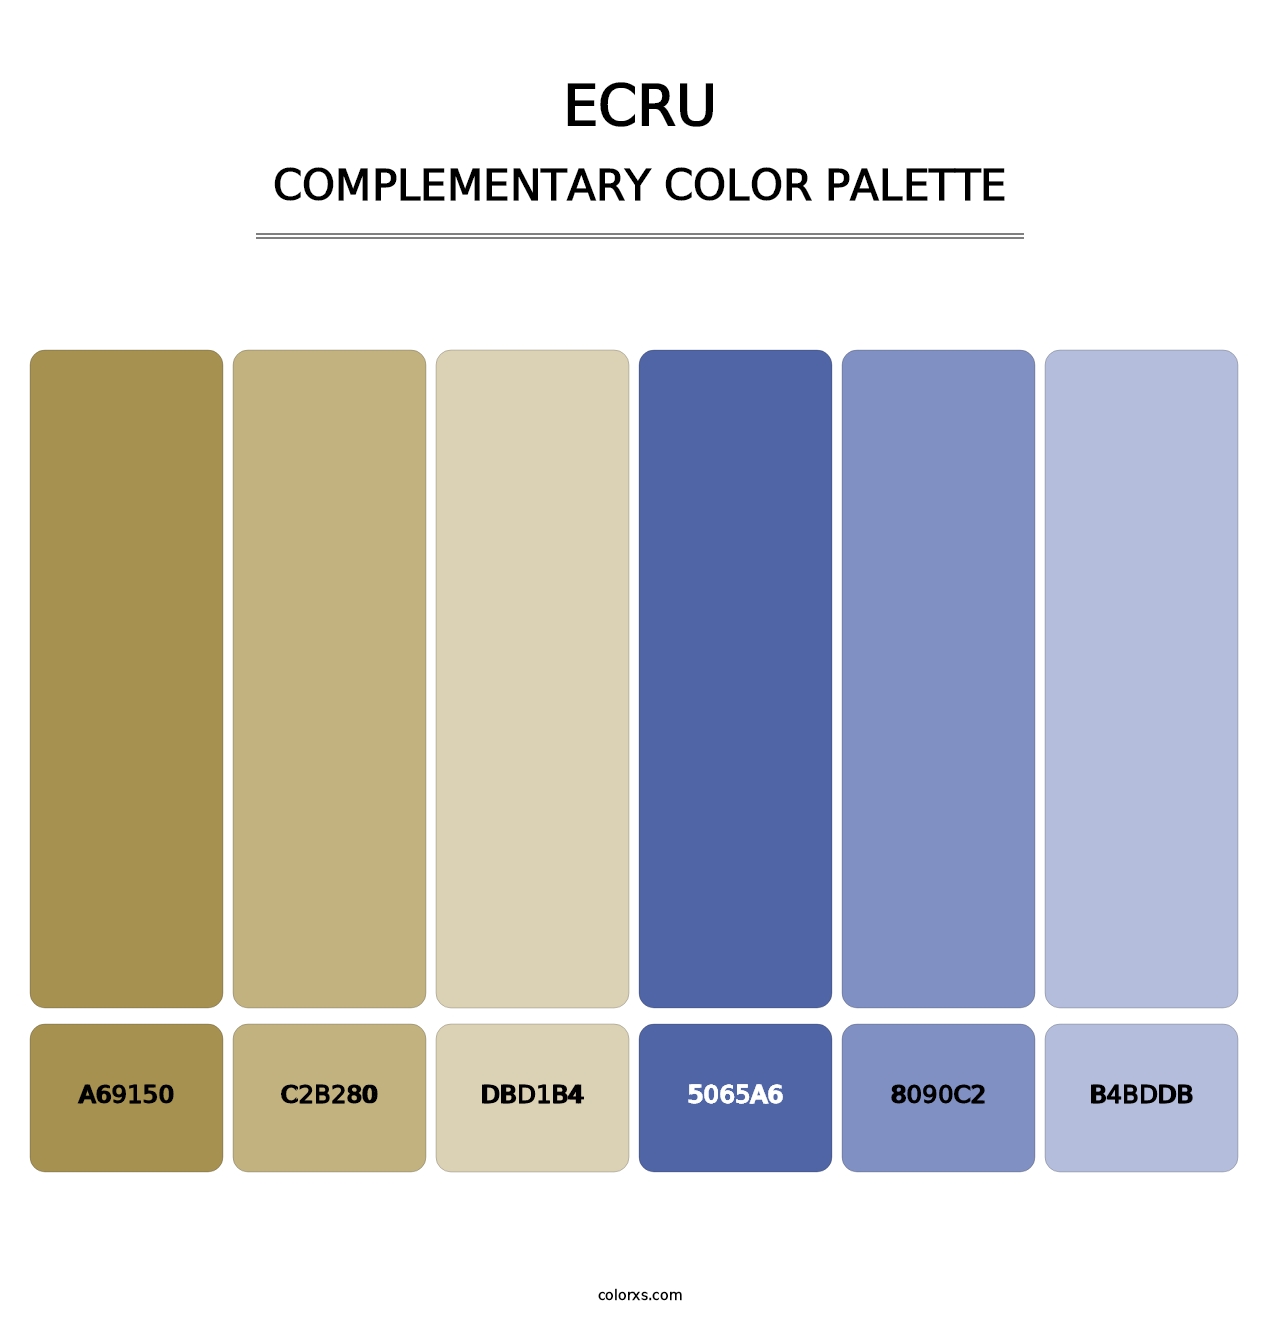 Ecru - Complementary Color Palette